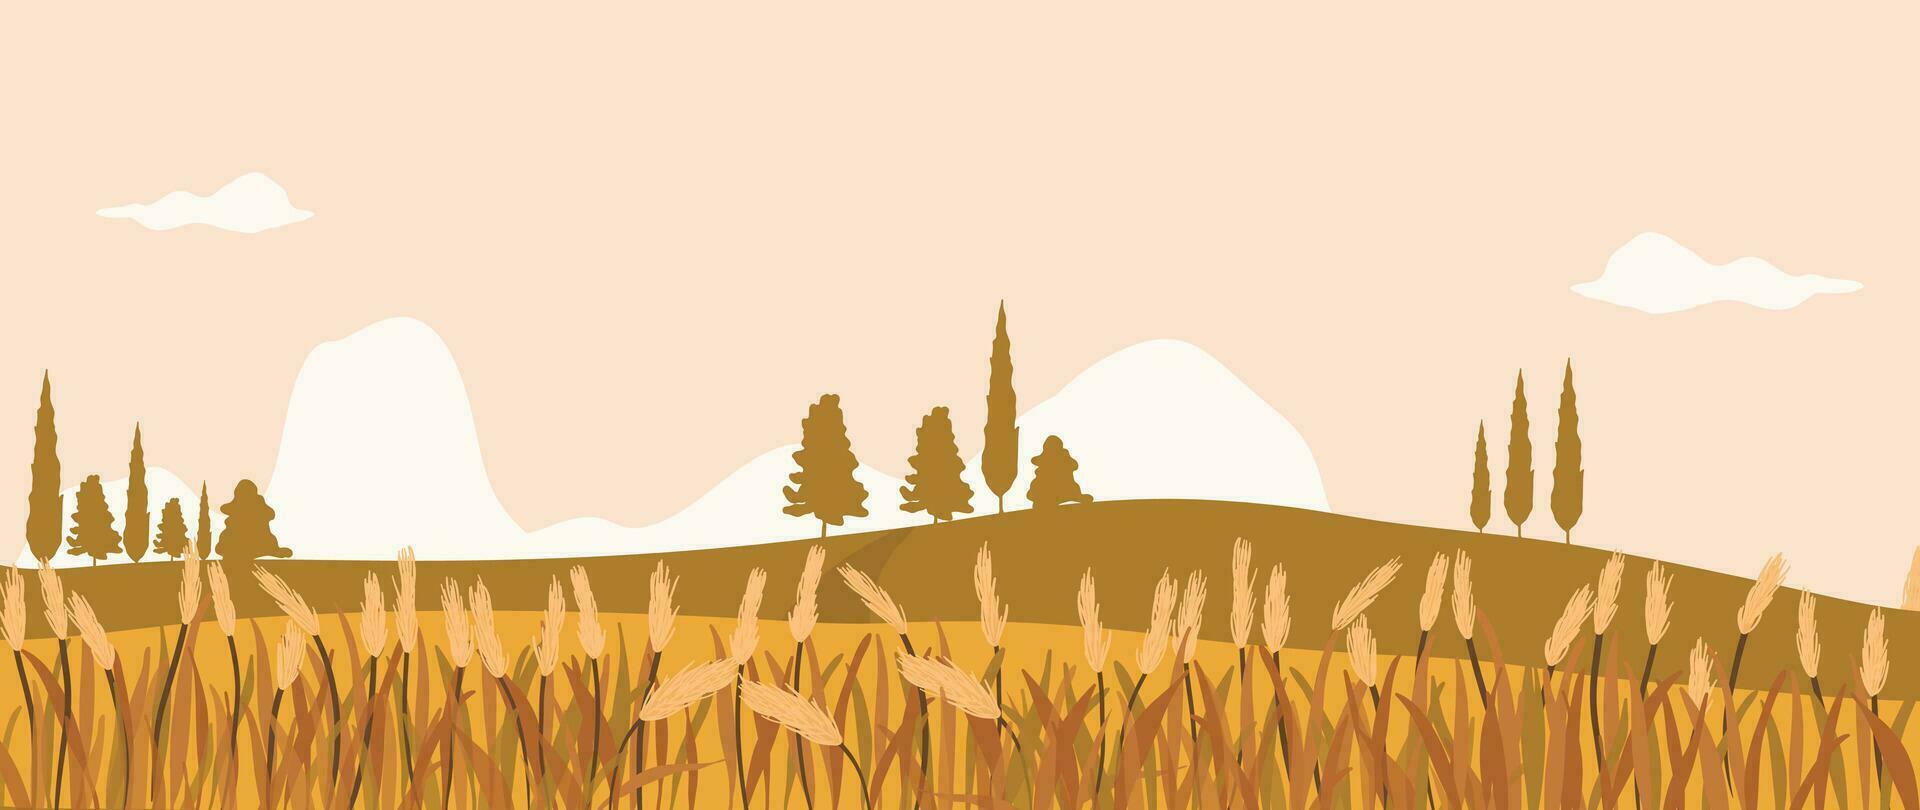 Autumn and country landscape background. Seasonal illustration vector of mountain, hill, grass, tree, cloud with watercolor, brush texture. Design for for promotion, advertising, banner, card.